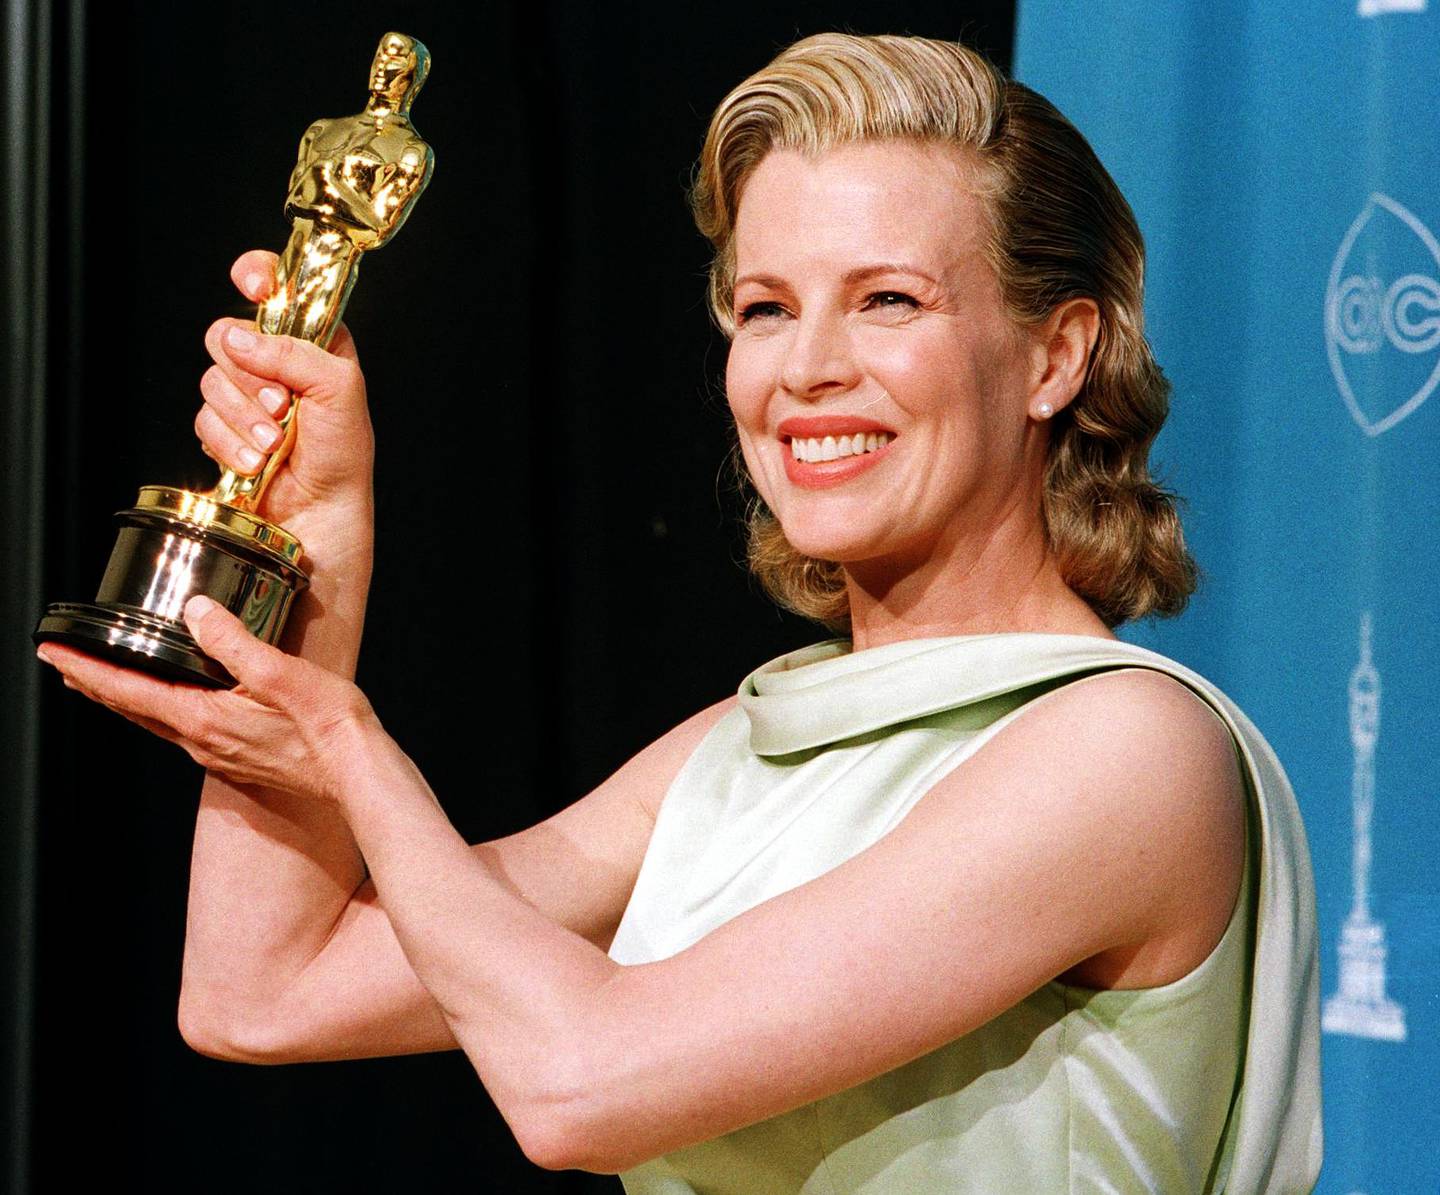 Kim Basinger, who won an Oscar for Best Supporting Actress for her role in 'LA Confidential', has spoken frankly about the agoraphobia which turned her into a recluse. AFP